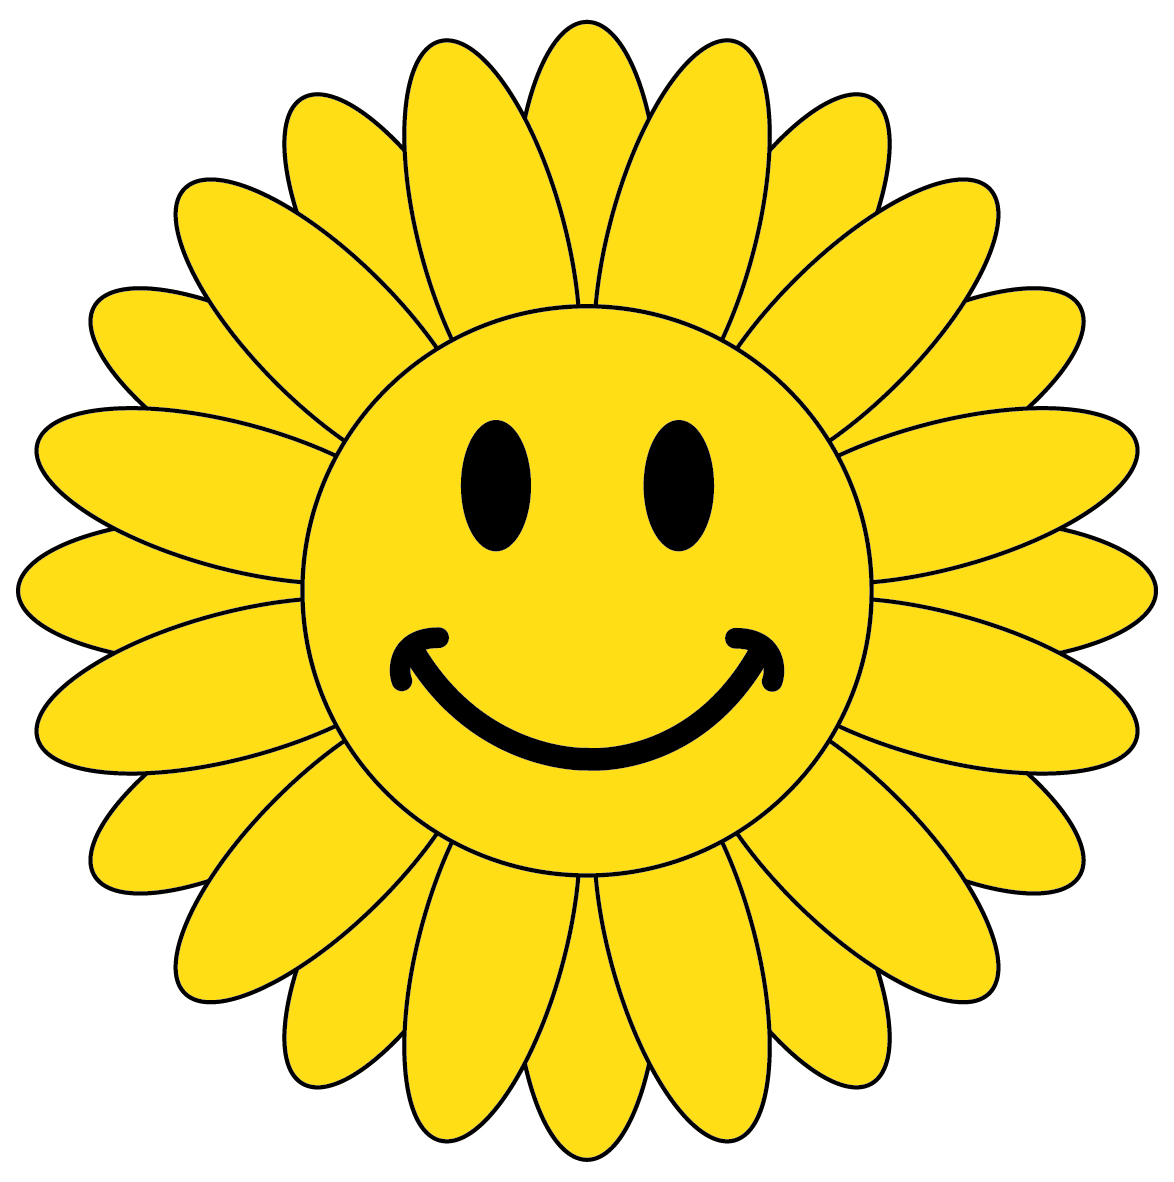 Smiley Face Flower Panda Free Images clipart free image